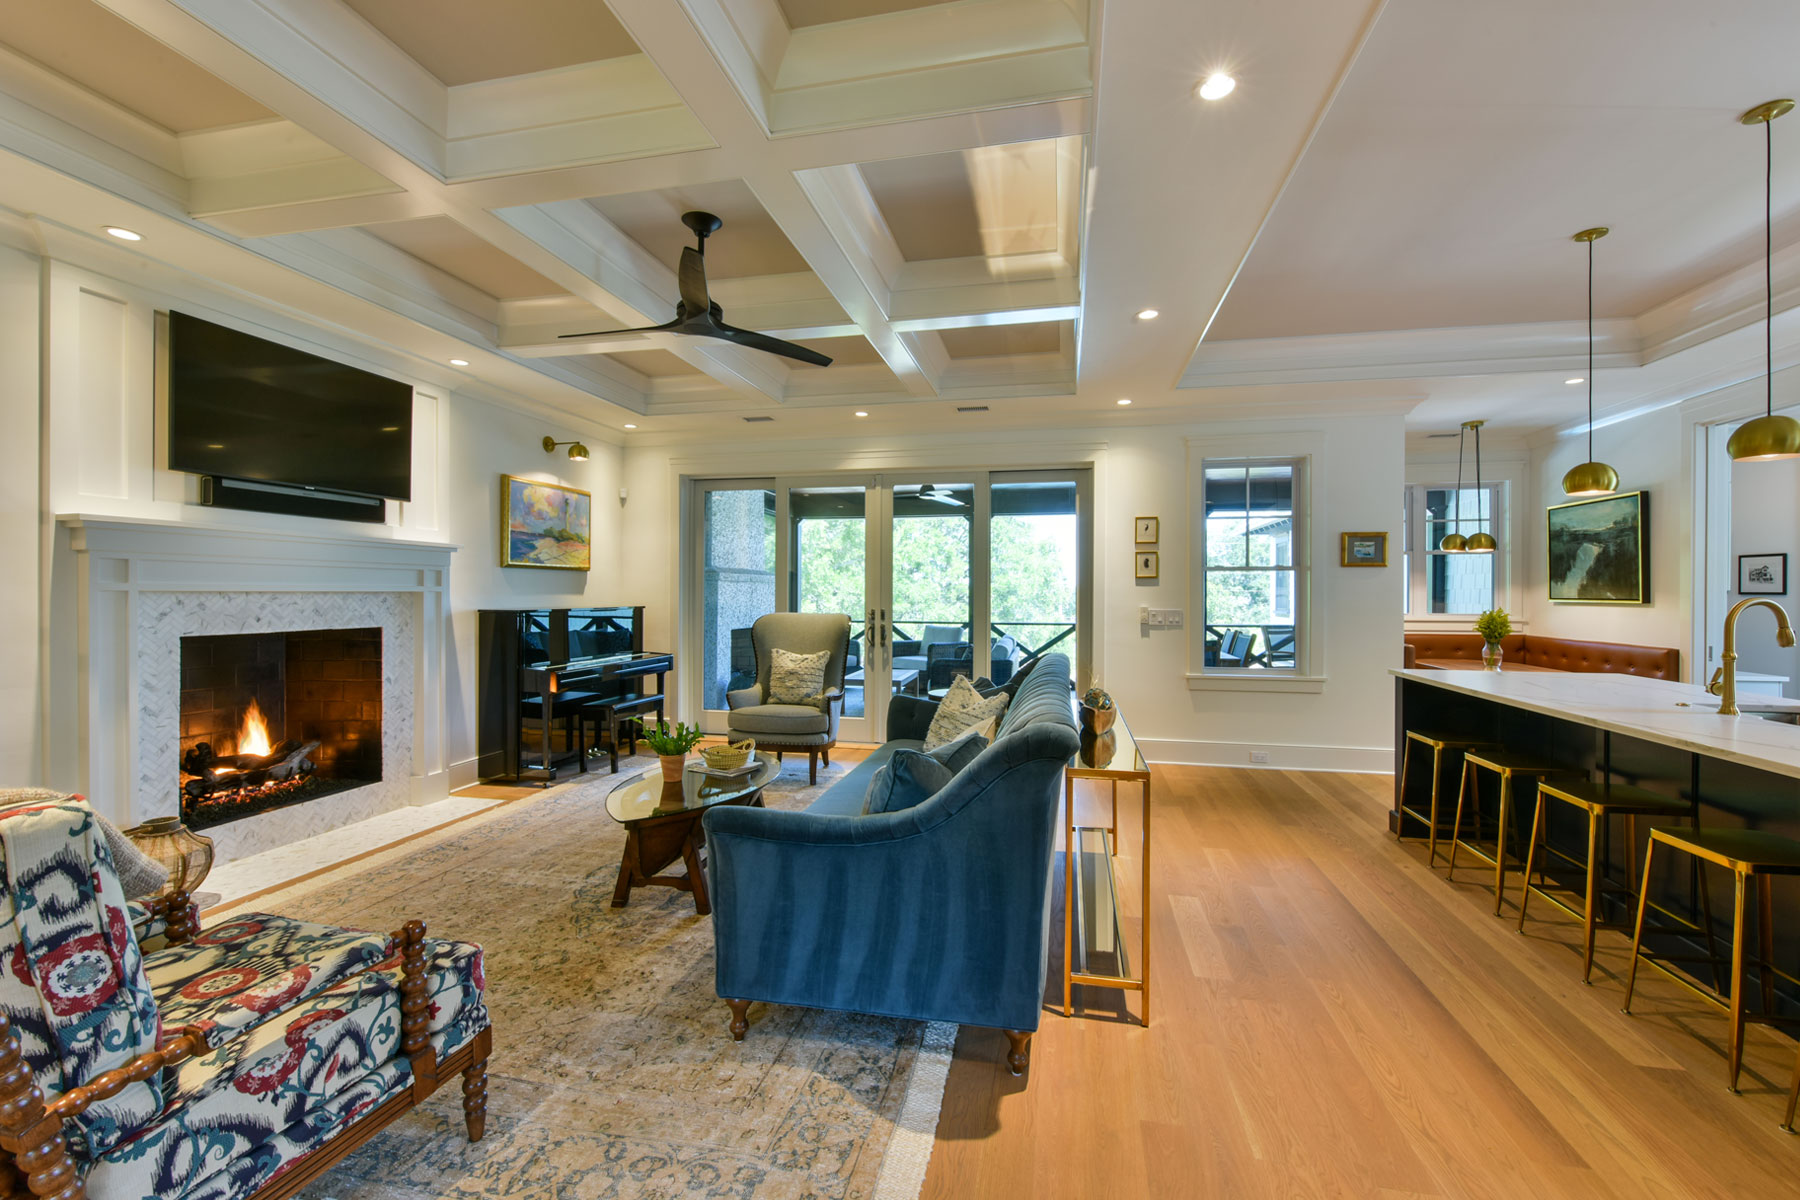 Open kitchen and family room with coffered ceiling